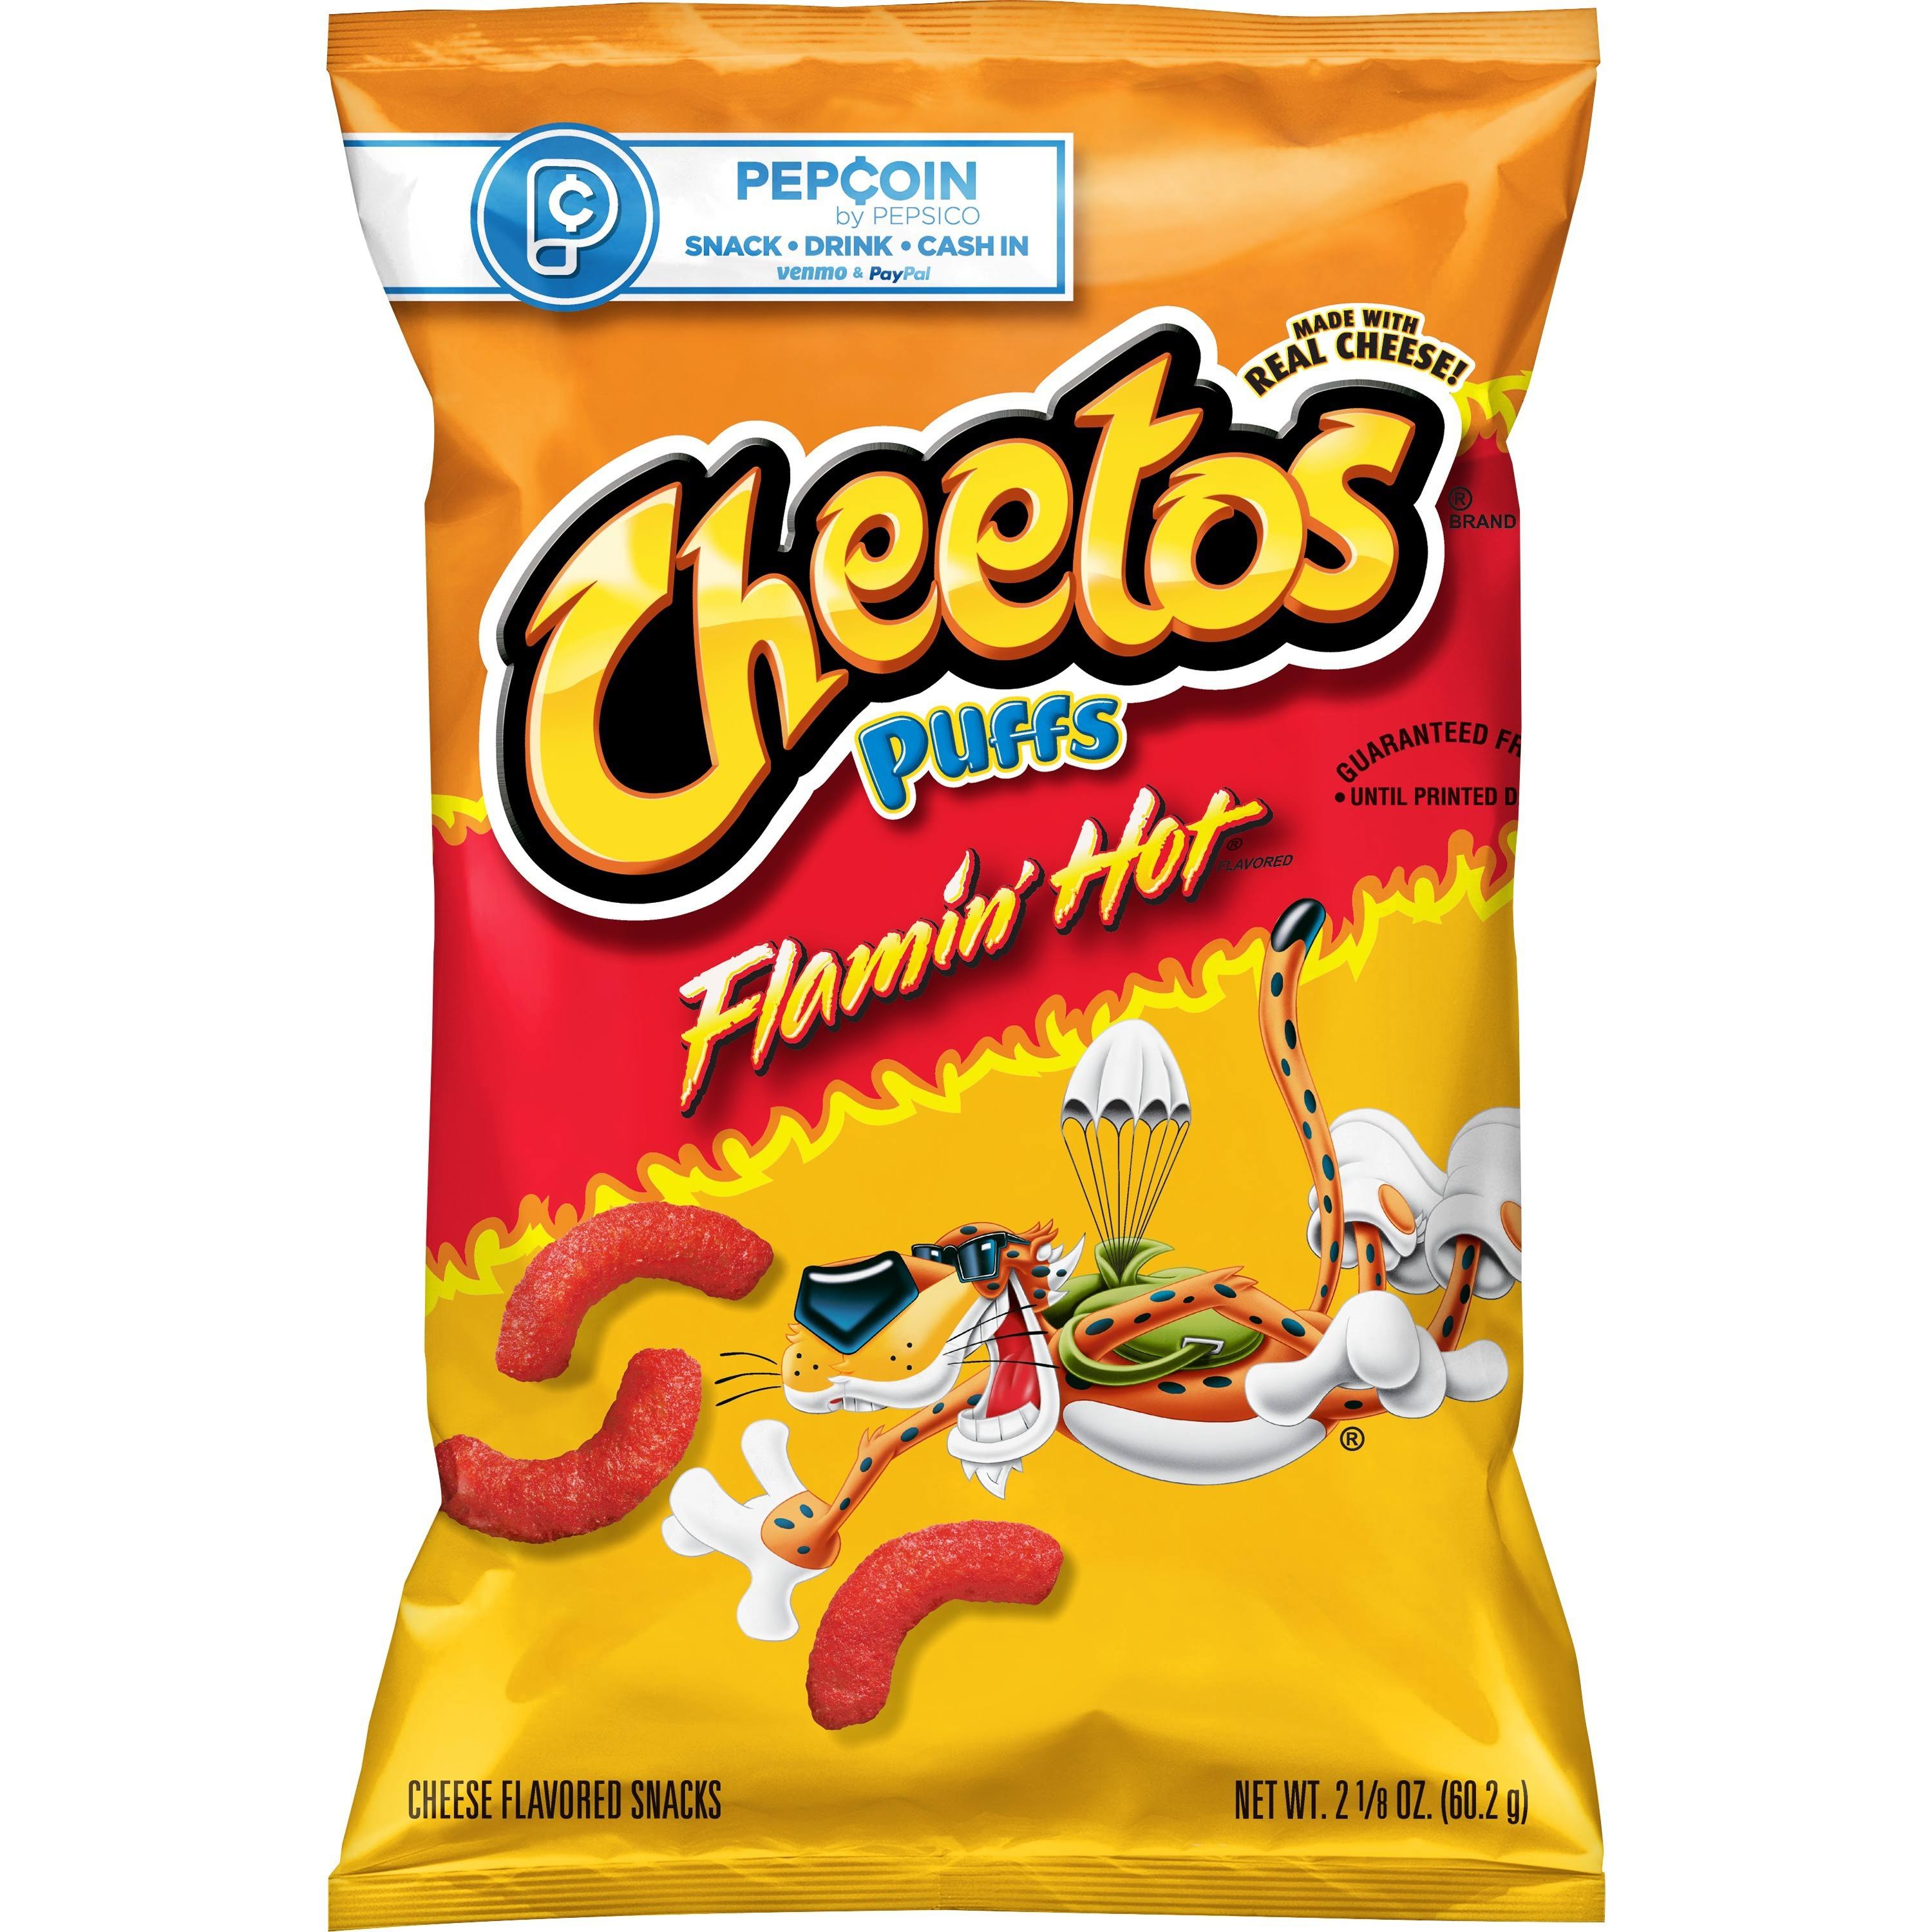 CHEETOS Cheese Flavored Snacks, Flamin' Hot Flavored, Puffs - 2.125 oz